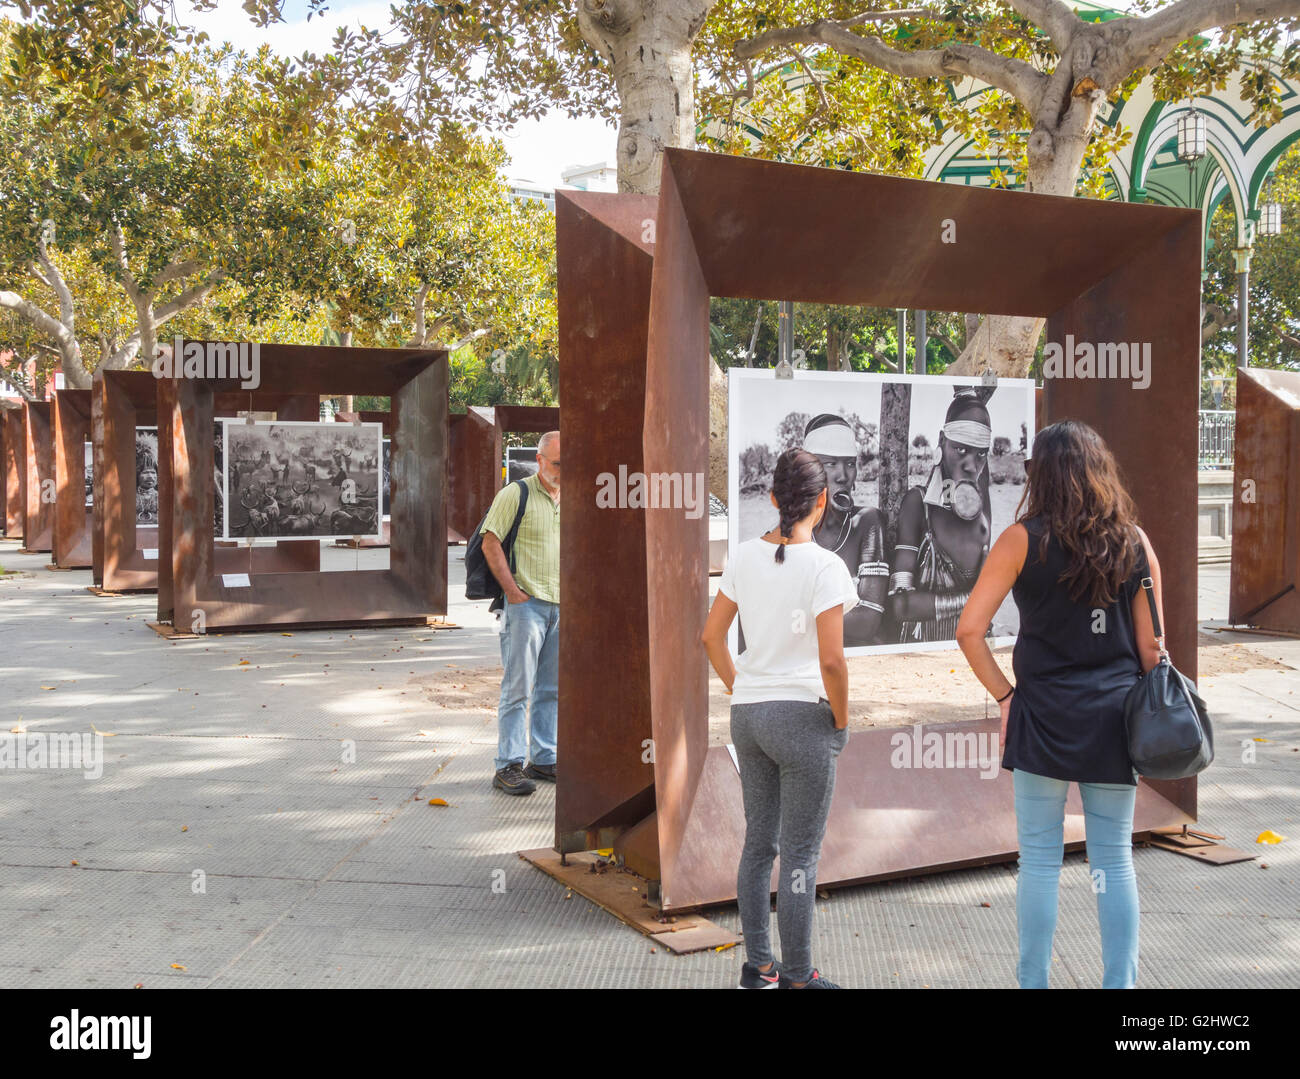 Las Palmas, Gran Canaria, Canary Islands, Spain, 1st June 2016. Glorious weather for a stroll around the `Genesis` exhibition by famous Brazilian photographer Sebastiao Salgado in Parque San Telmo in Las Palmas, the capital of Gran Canaria. The open air exhibition runs until 21st June 2016 - part of the city`s `art in the street` iniciative. Credit:  Alan Dawson News/Alamy Live News Stock Photo